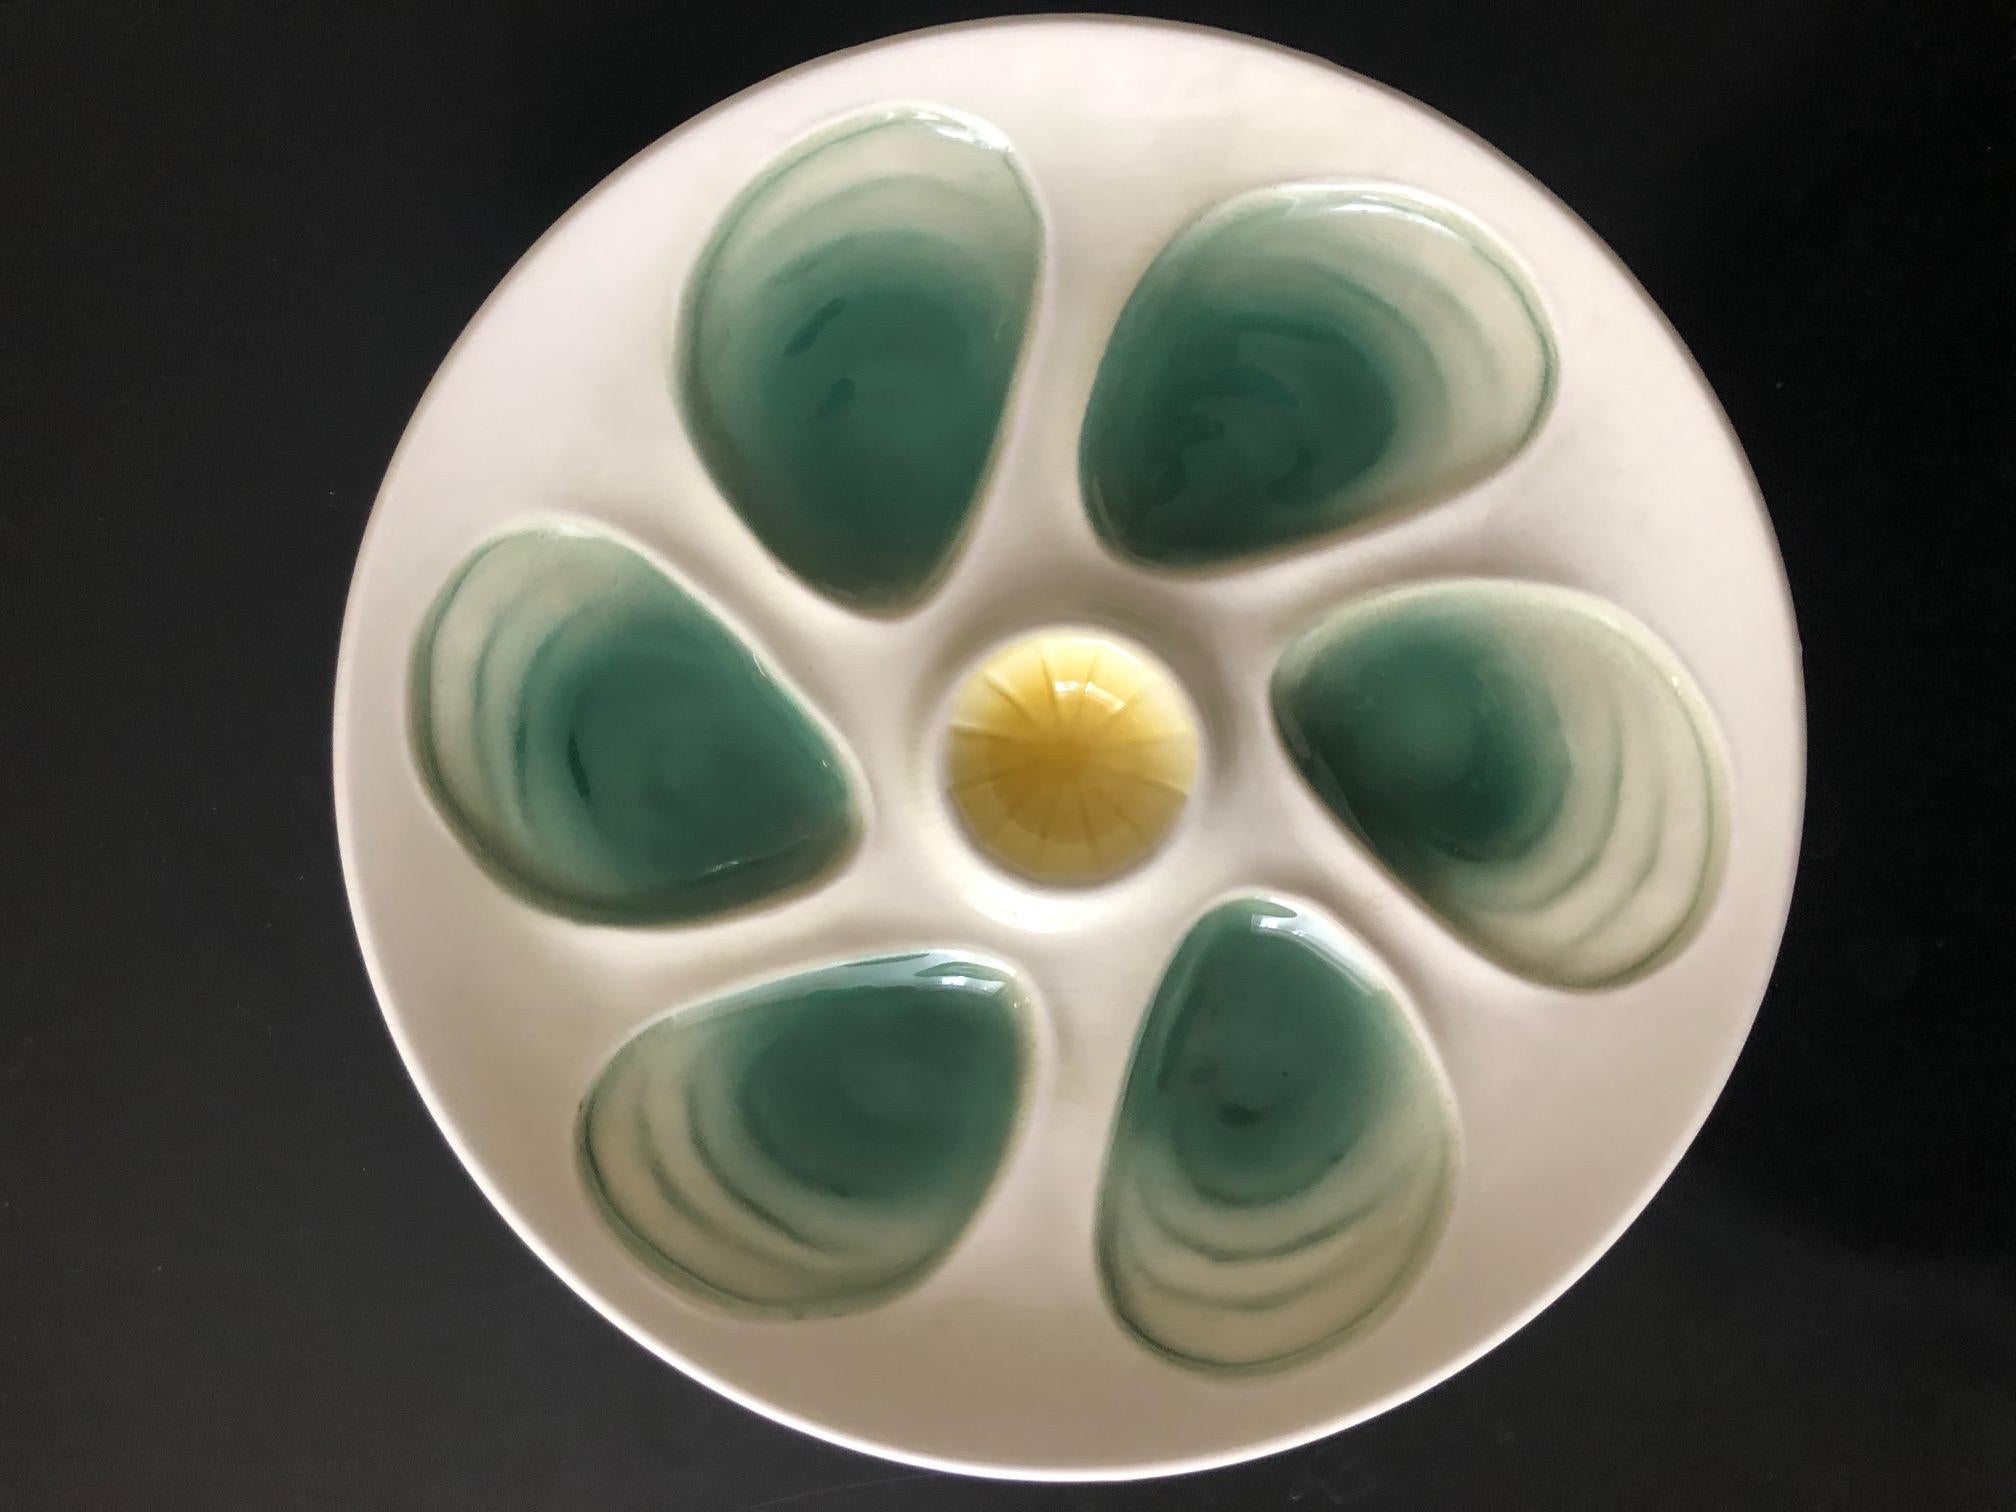 Ceramic plates from the 1950s manufactured by Salins.